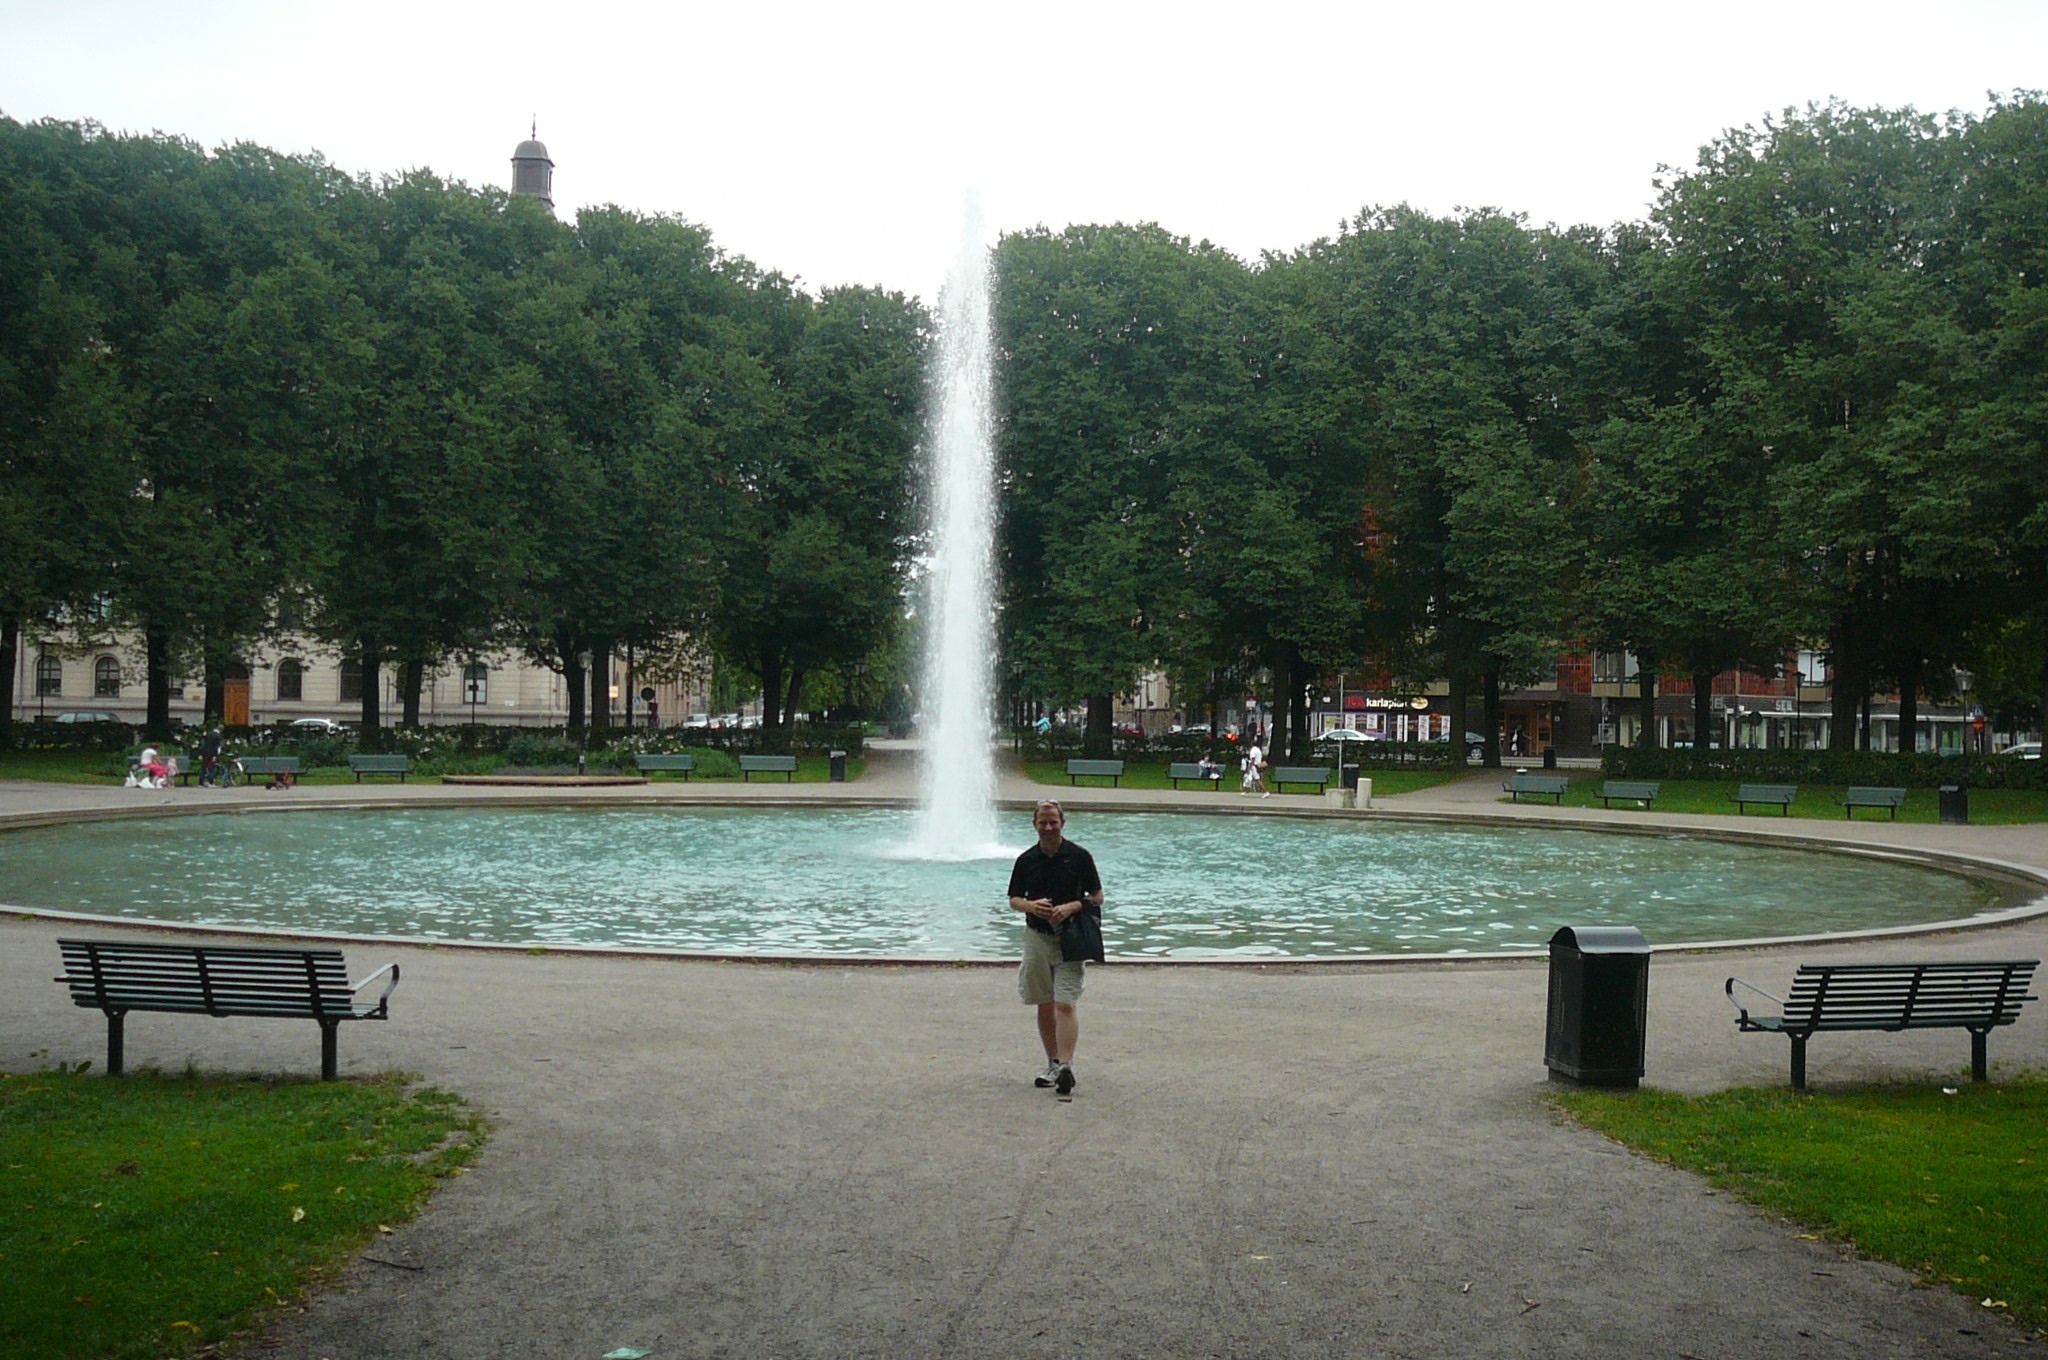 Shawn Power enjoying one of the many parks (and fountains) that Stockholm, Sweden has to offer